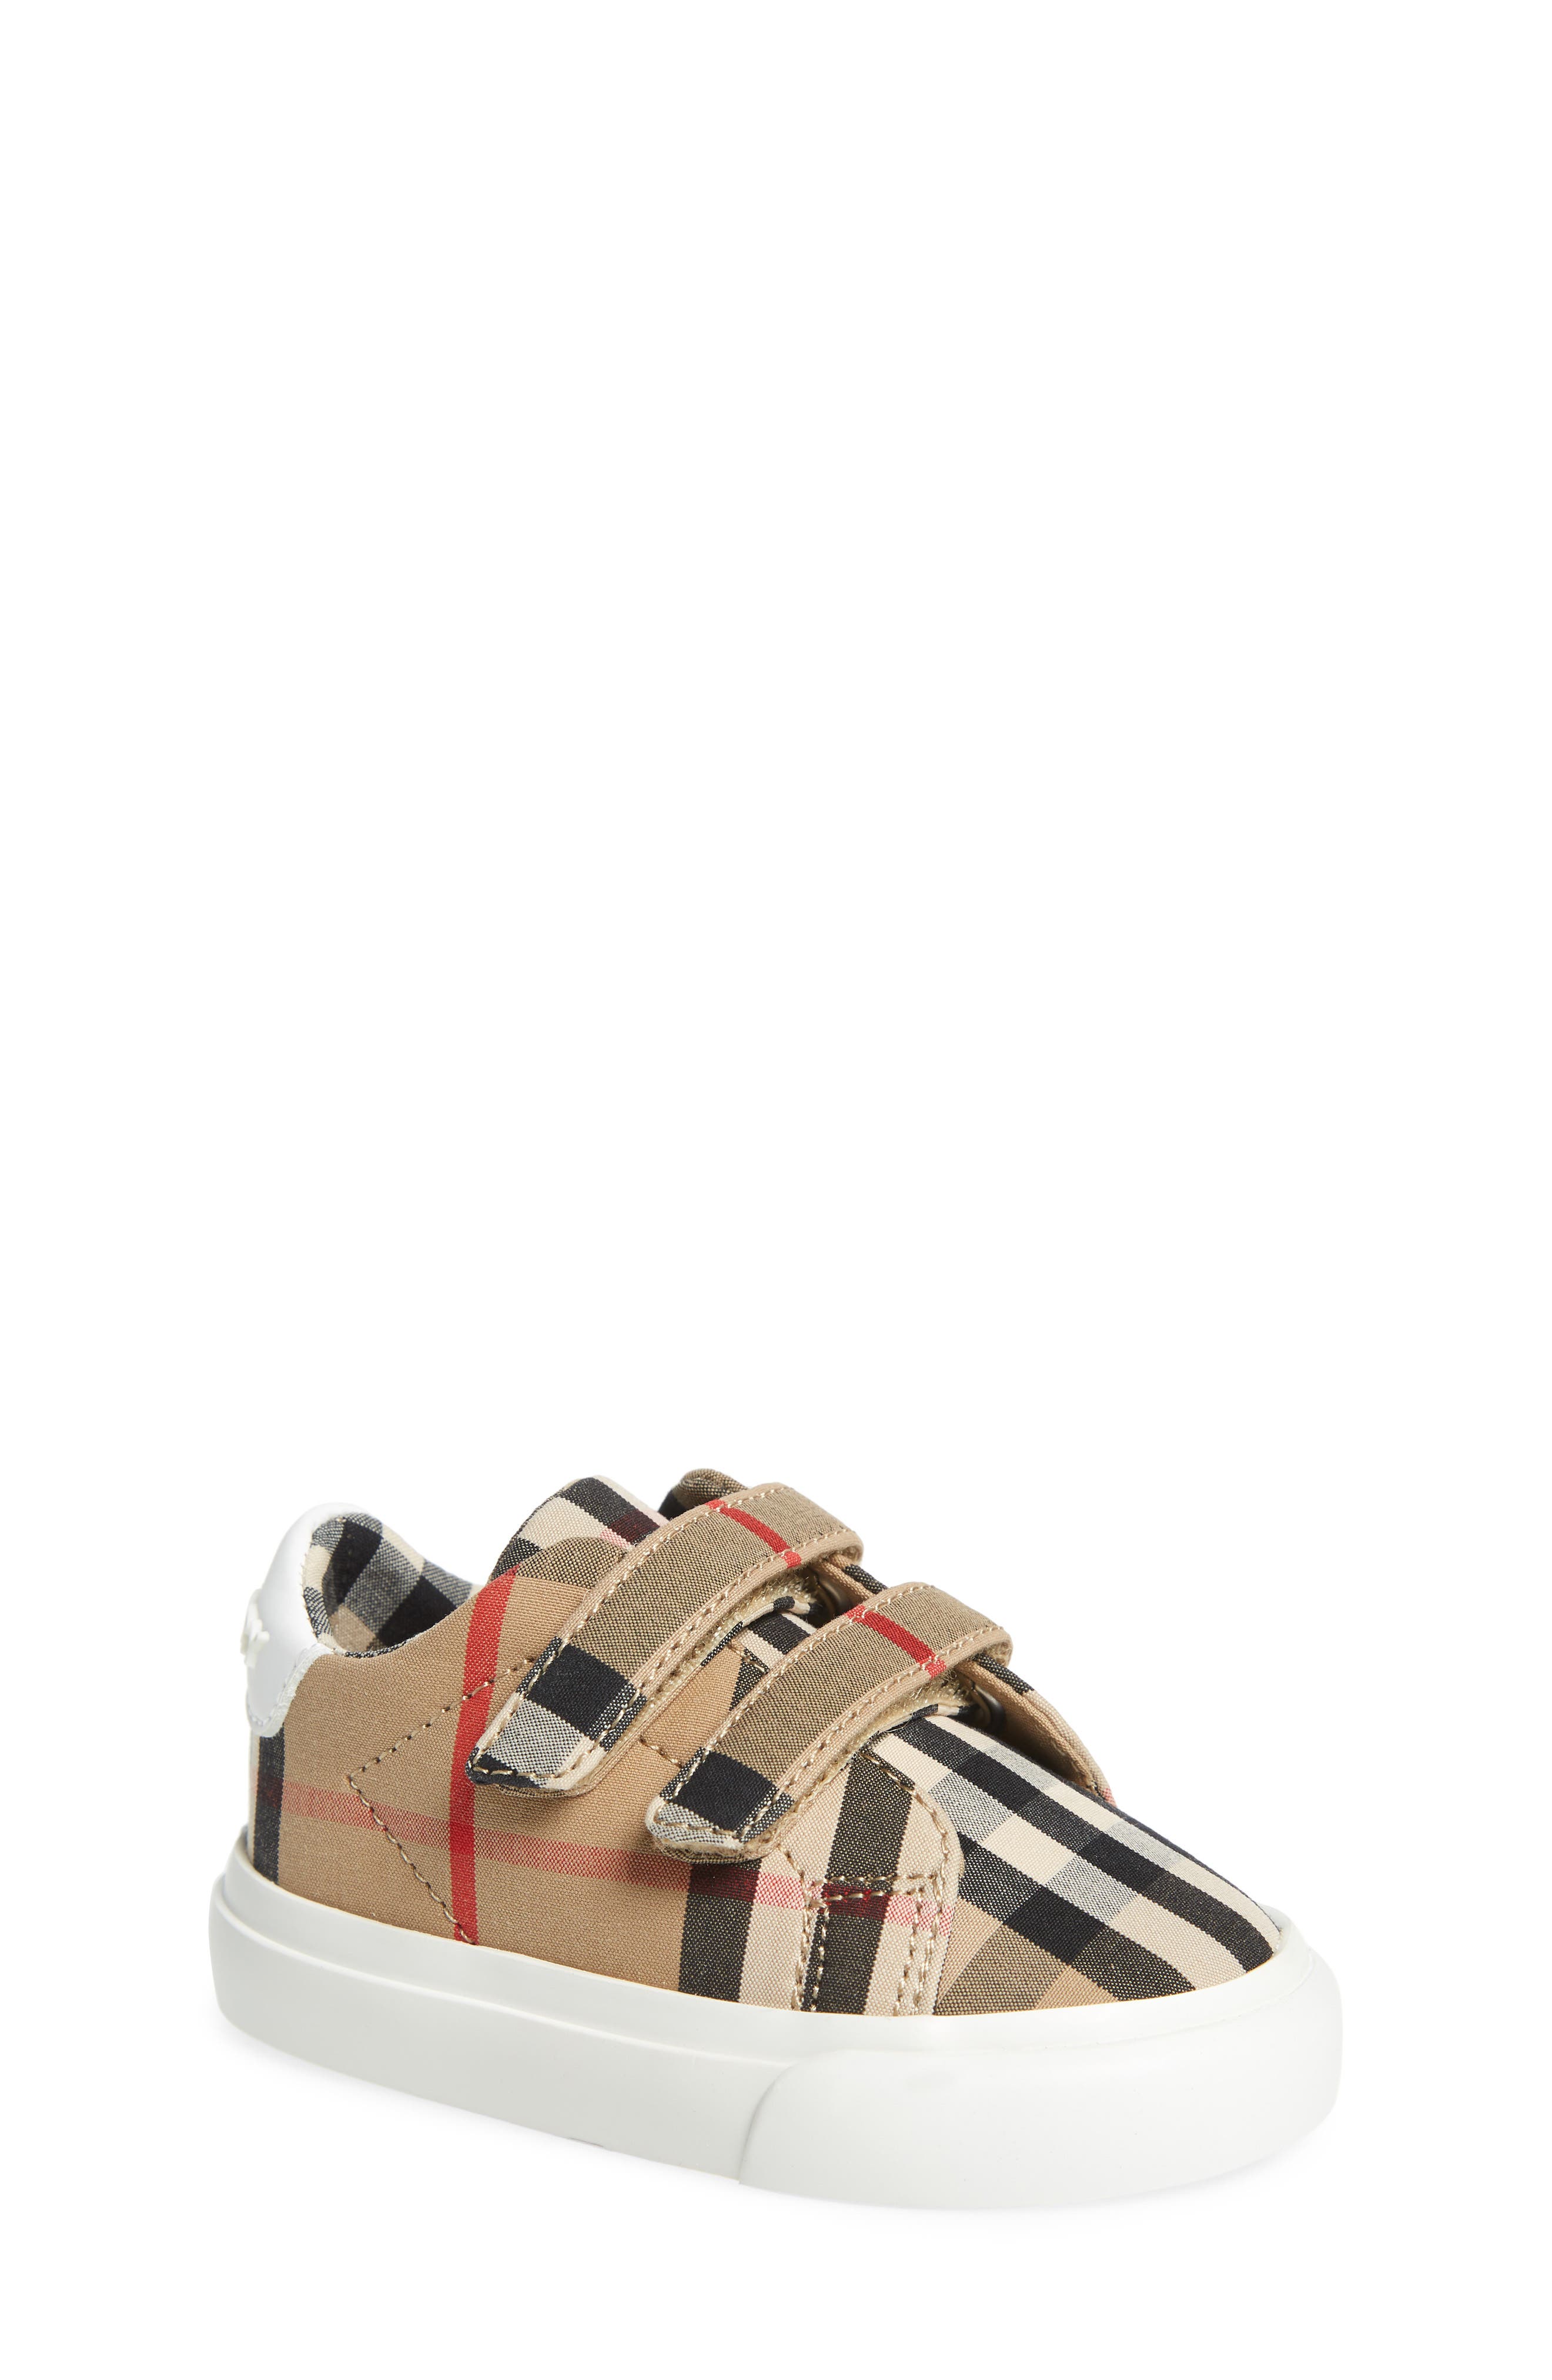 burberry childrens shoes